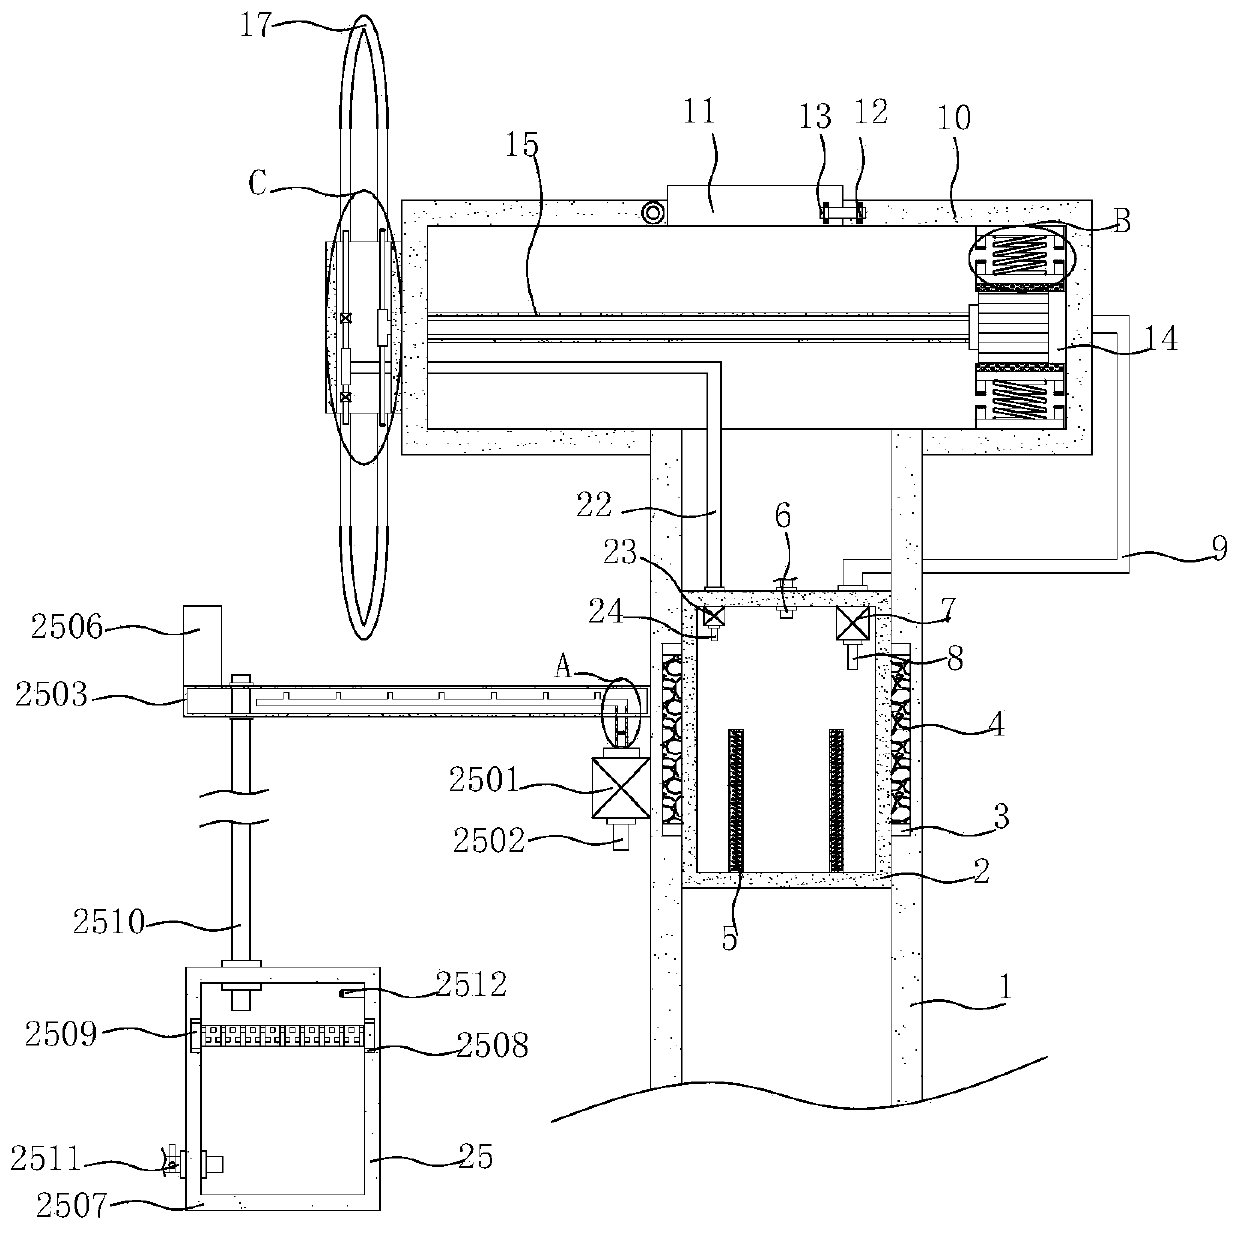 Built-in wind driven generator blade heating device